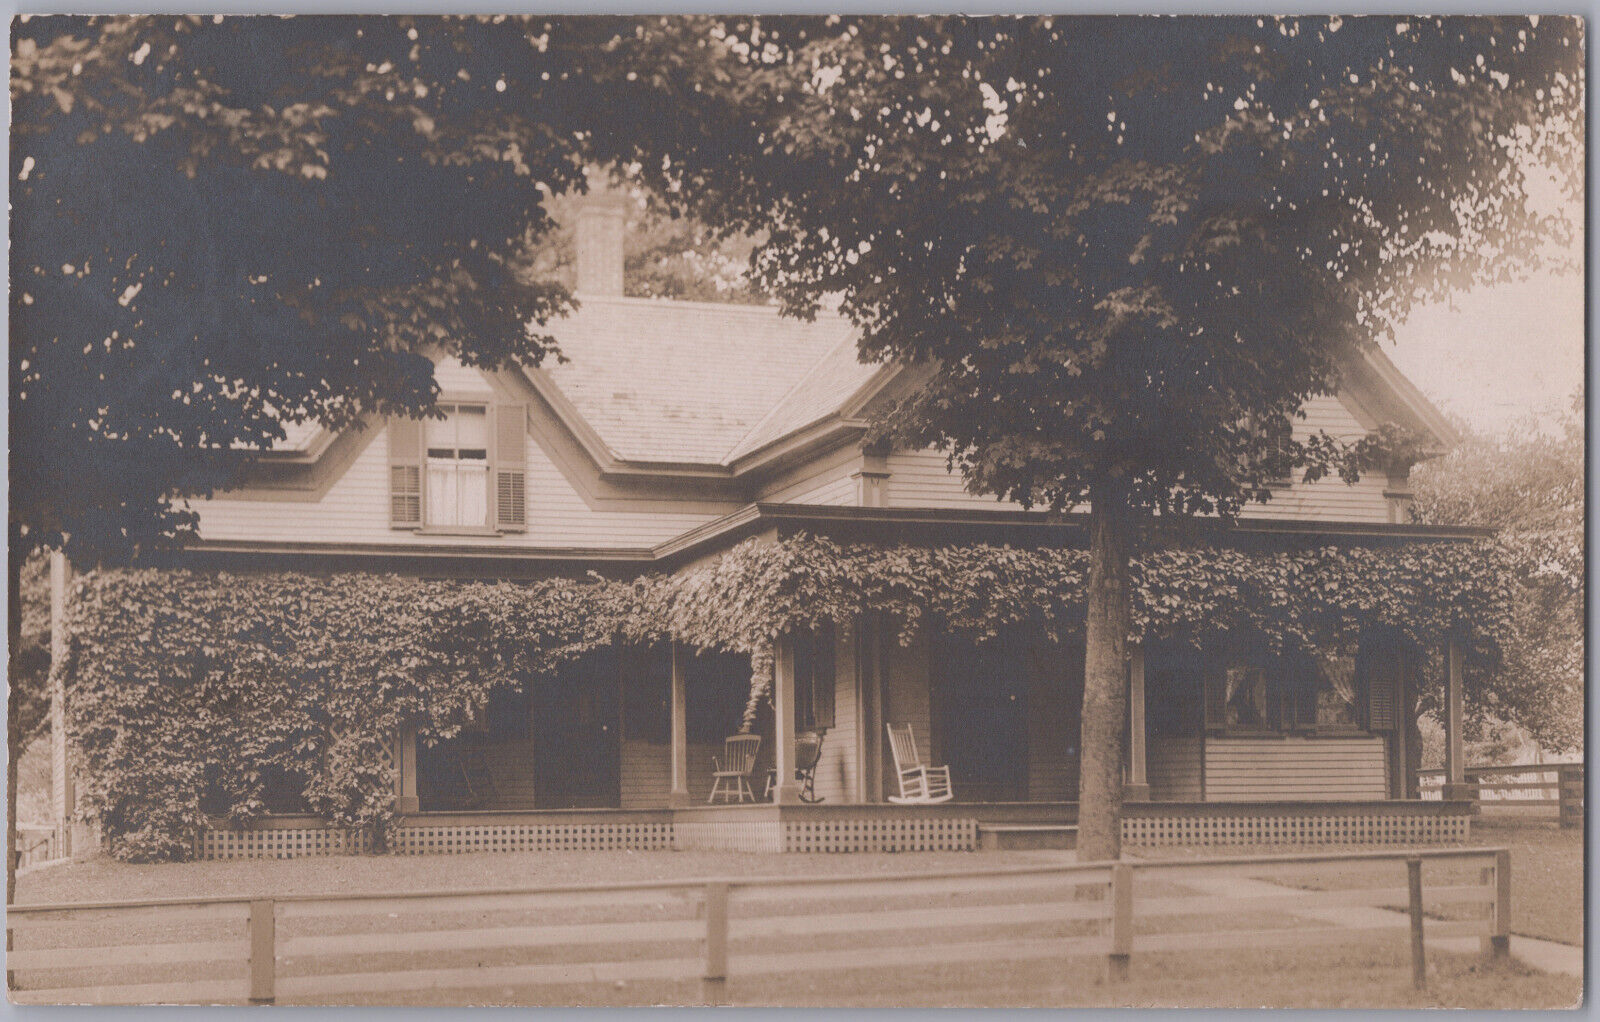 29 Stratton Rd in Jaffrey, NH Residence House Home RPPC Photo Postcard